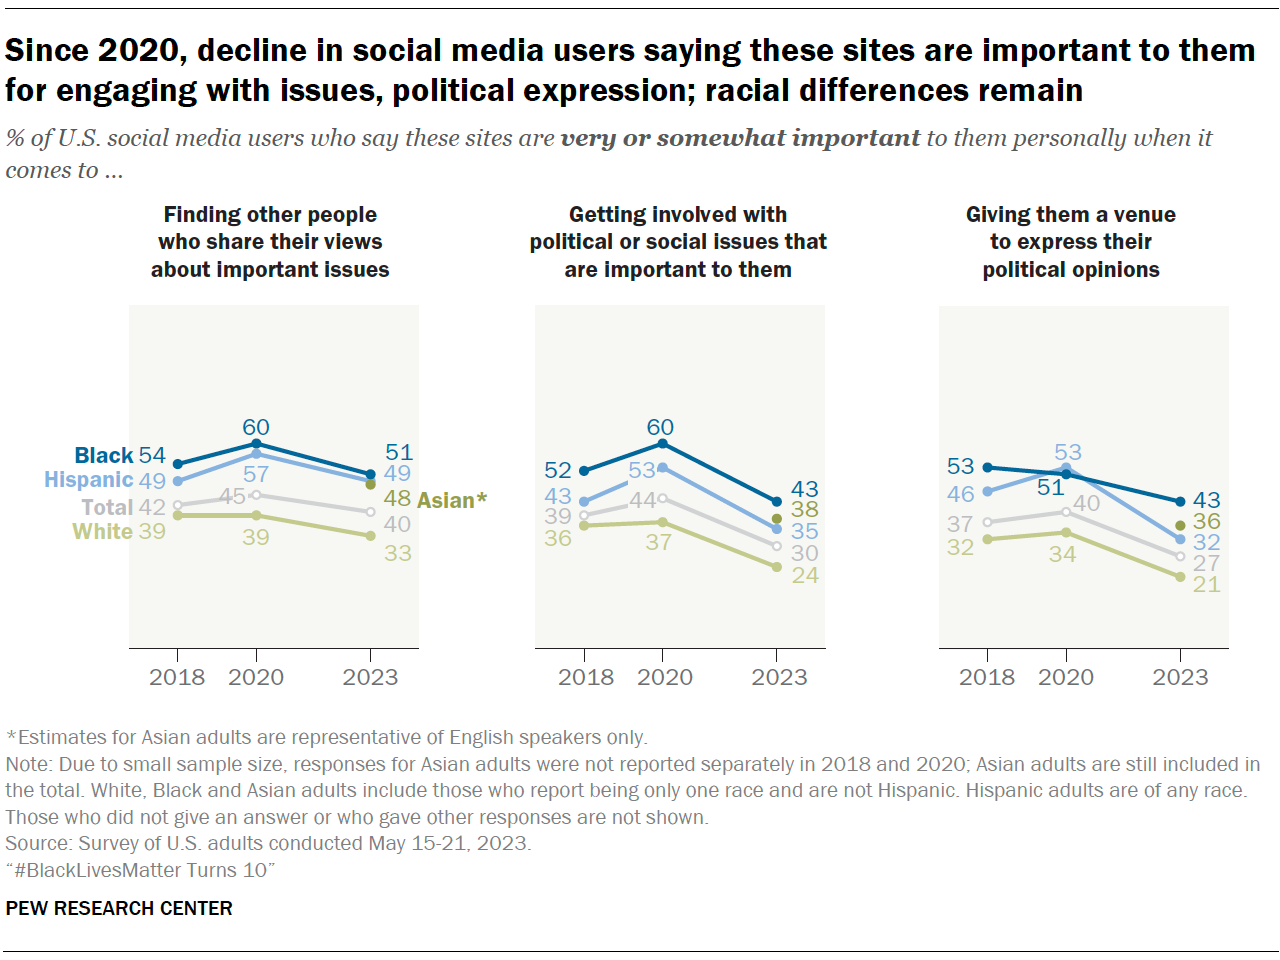 Three line charts showing that since 2020, there's been a decline in social media users saying these sites are important to them for engaging with issues, political expression; racial differences remain